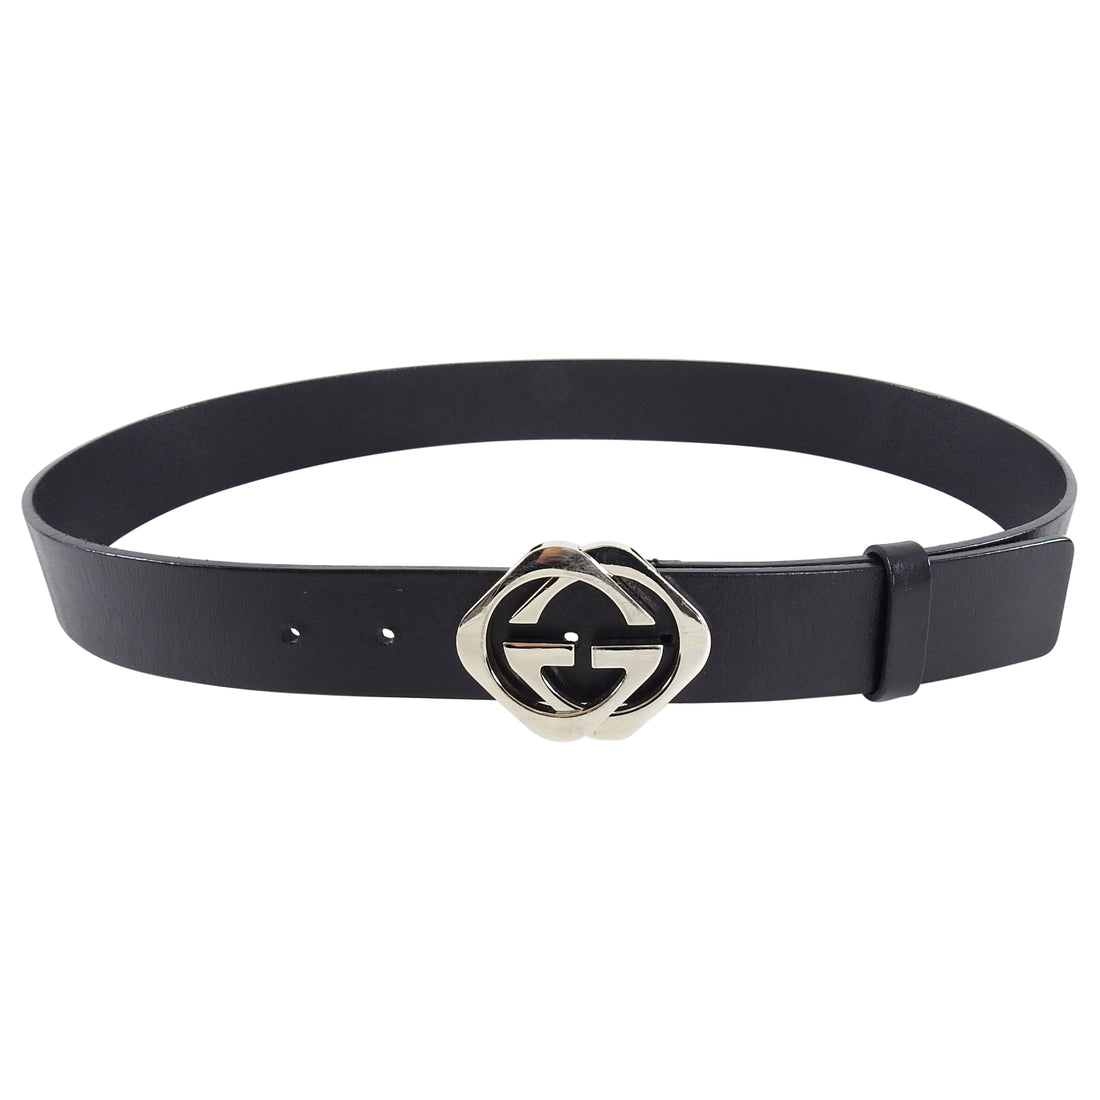 Gucci Black Belt with Silver GG Buckle - 36 / L – I MISS YOU VINTAGE